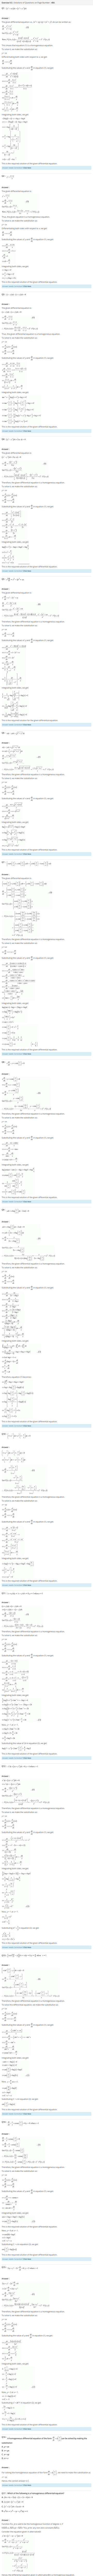 NCERT Solutions for Class 12 Maths Chapter 9 Differential Equations 6